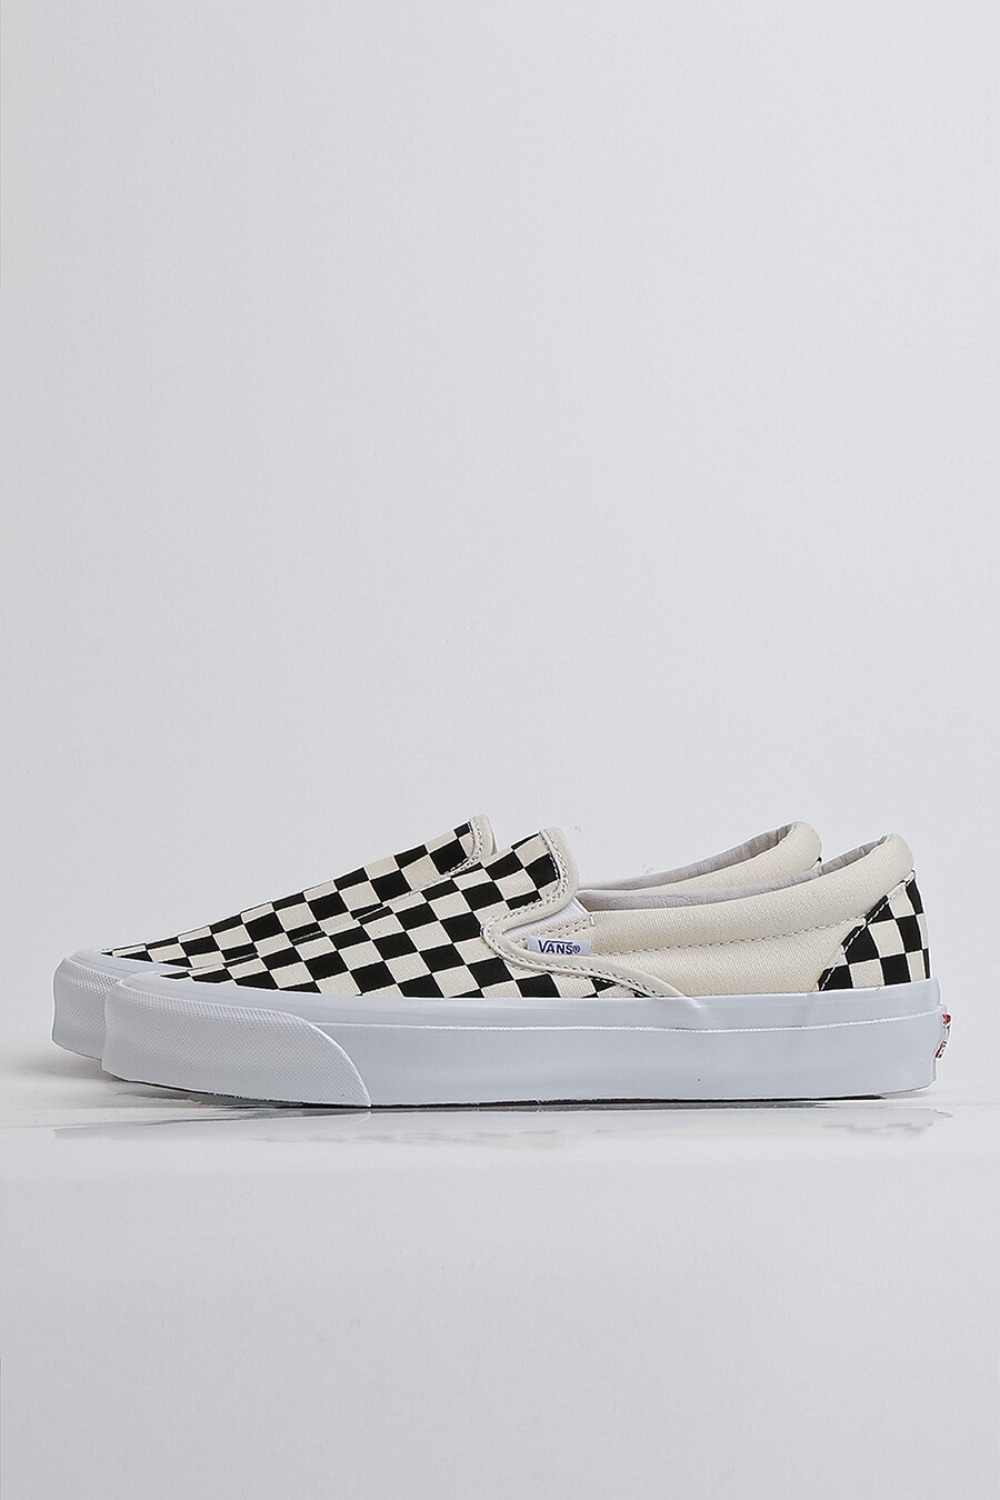 OG Classic Slip-On LX(Canvas) CHECKERBOARD